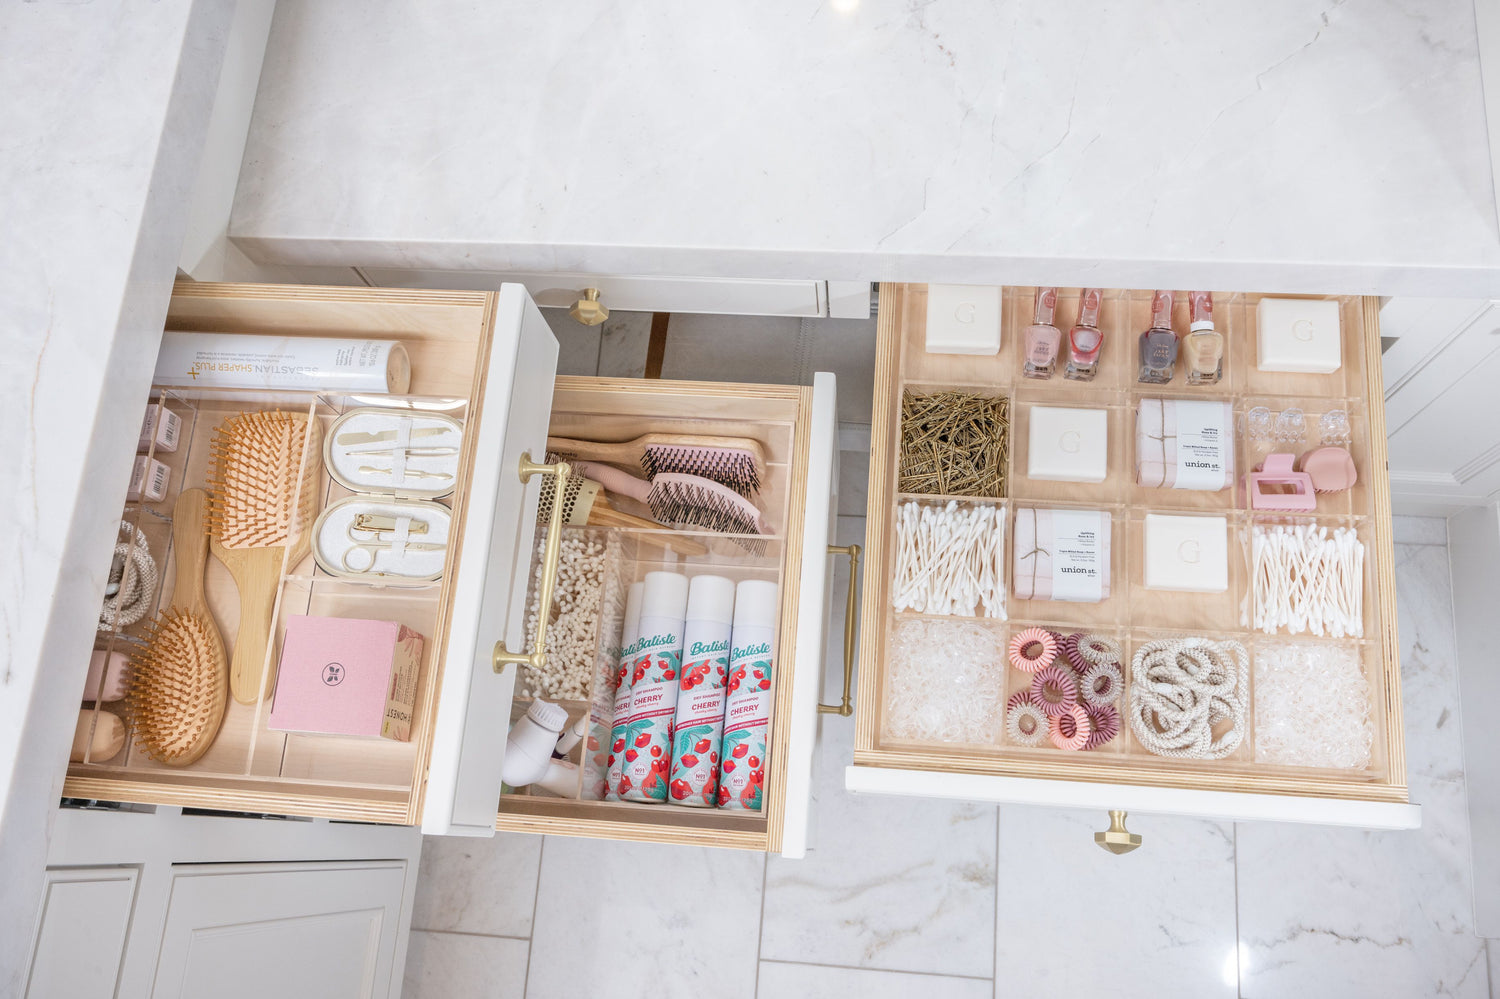 Three bathroom drawers opened to show each perfectly organized with a Custom-fit Acrylic Organizer.